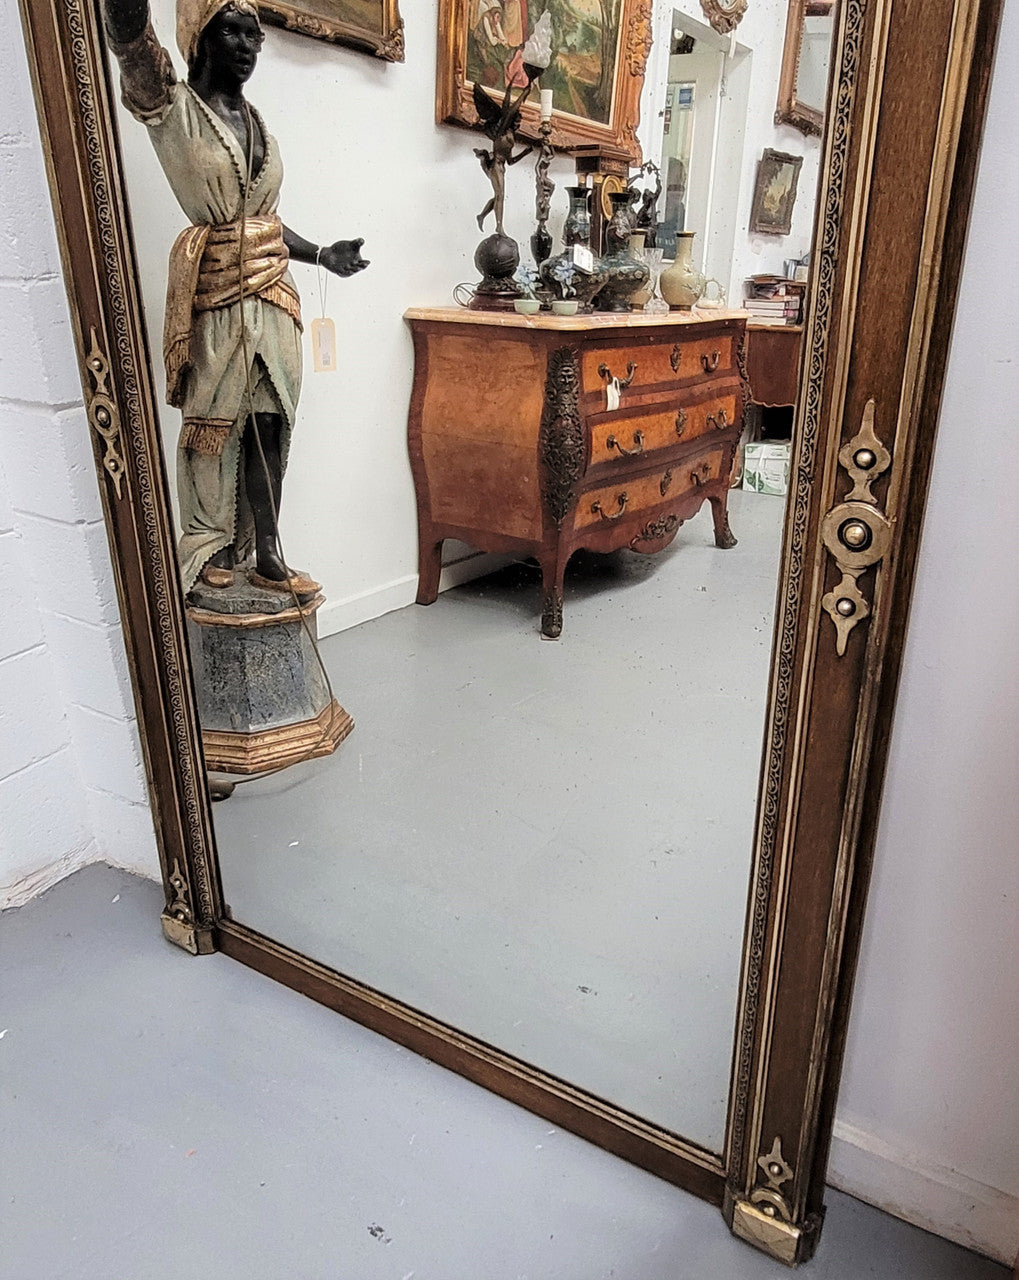 Early 19th Century French gilt and simulated wood mantel mirror. It still contains its original glass which contains loads of character. It is in very good detailed condition and has had minor restorations.